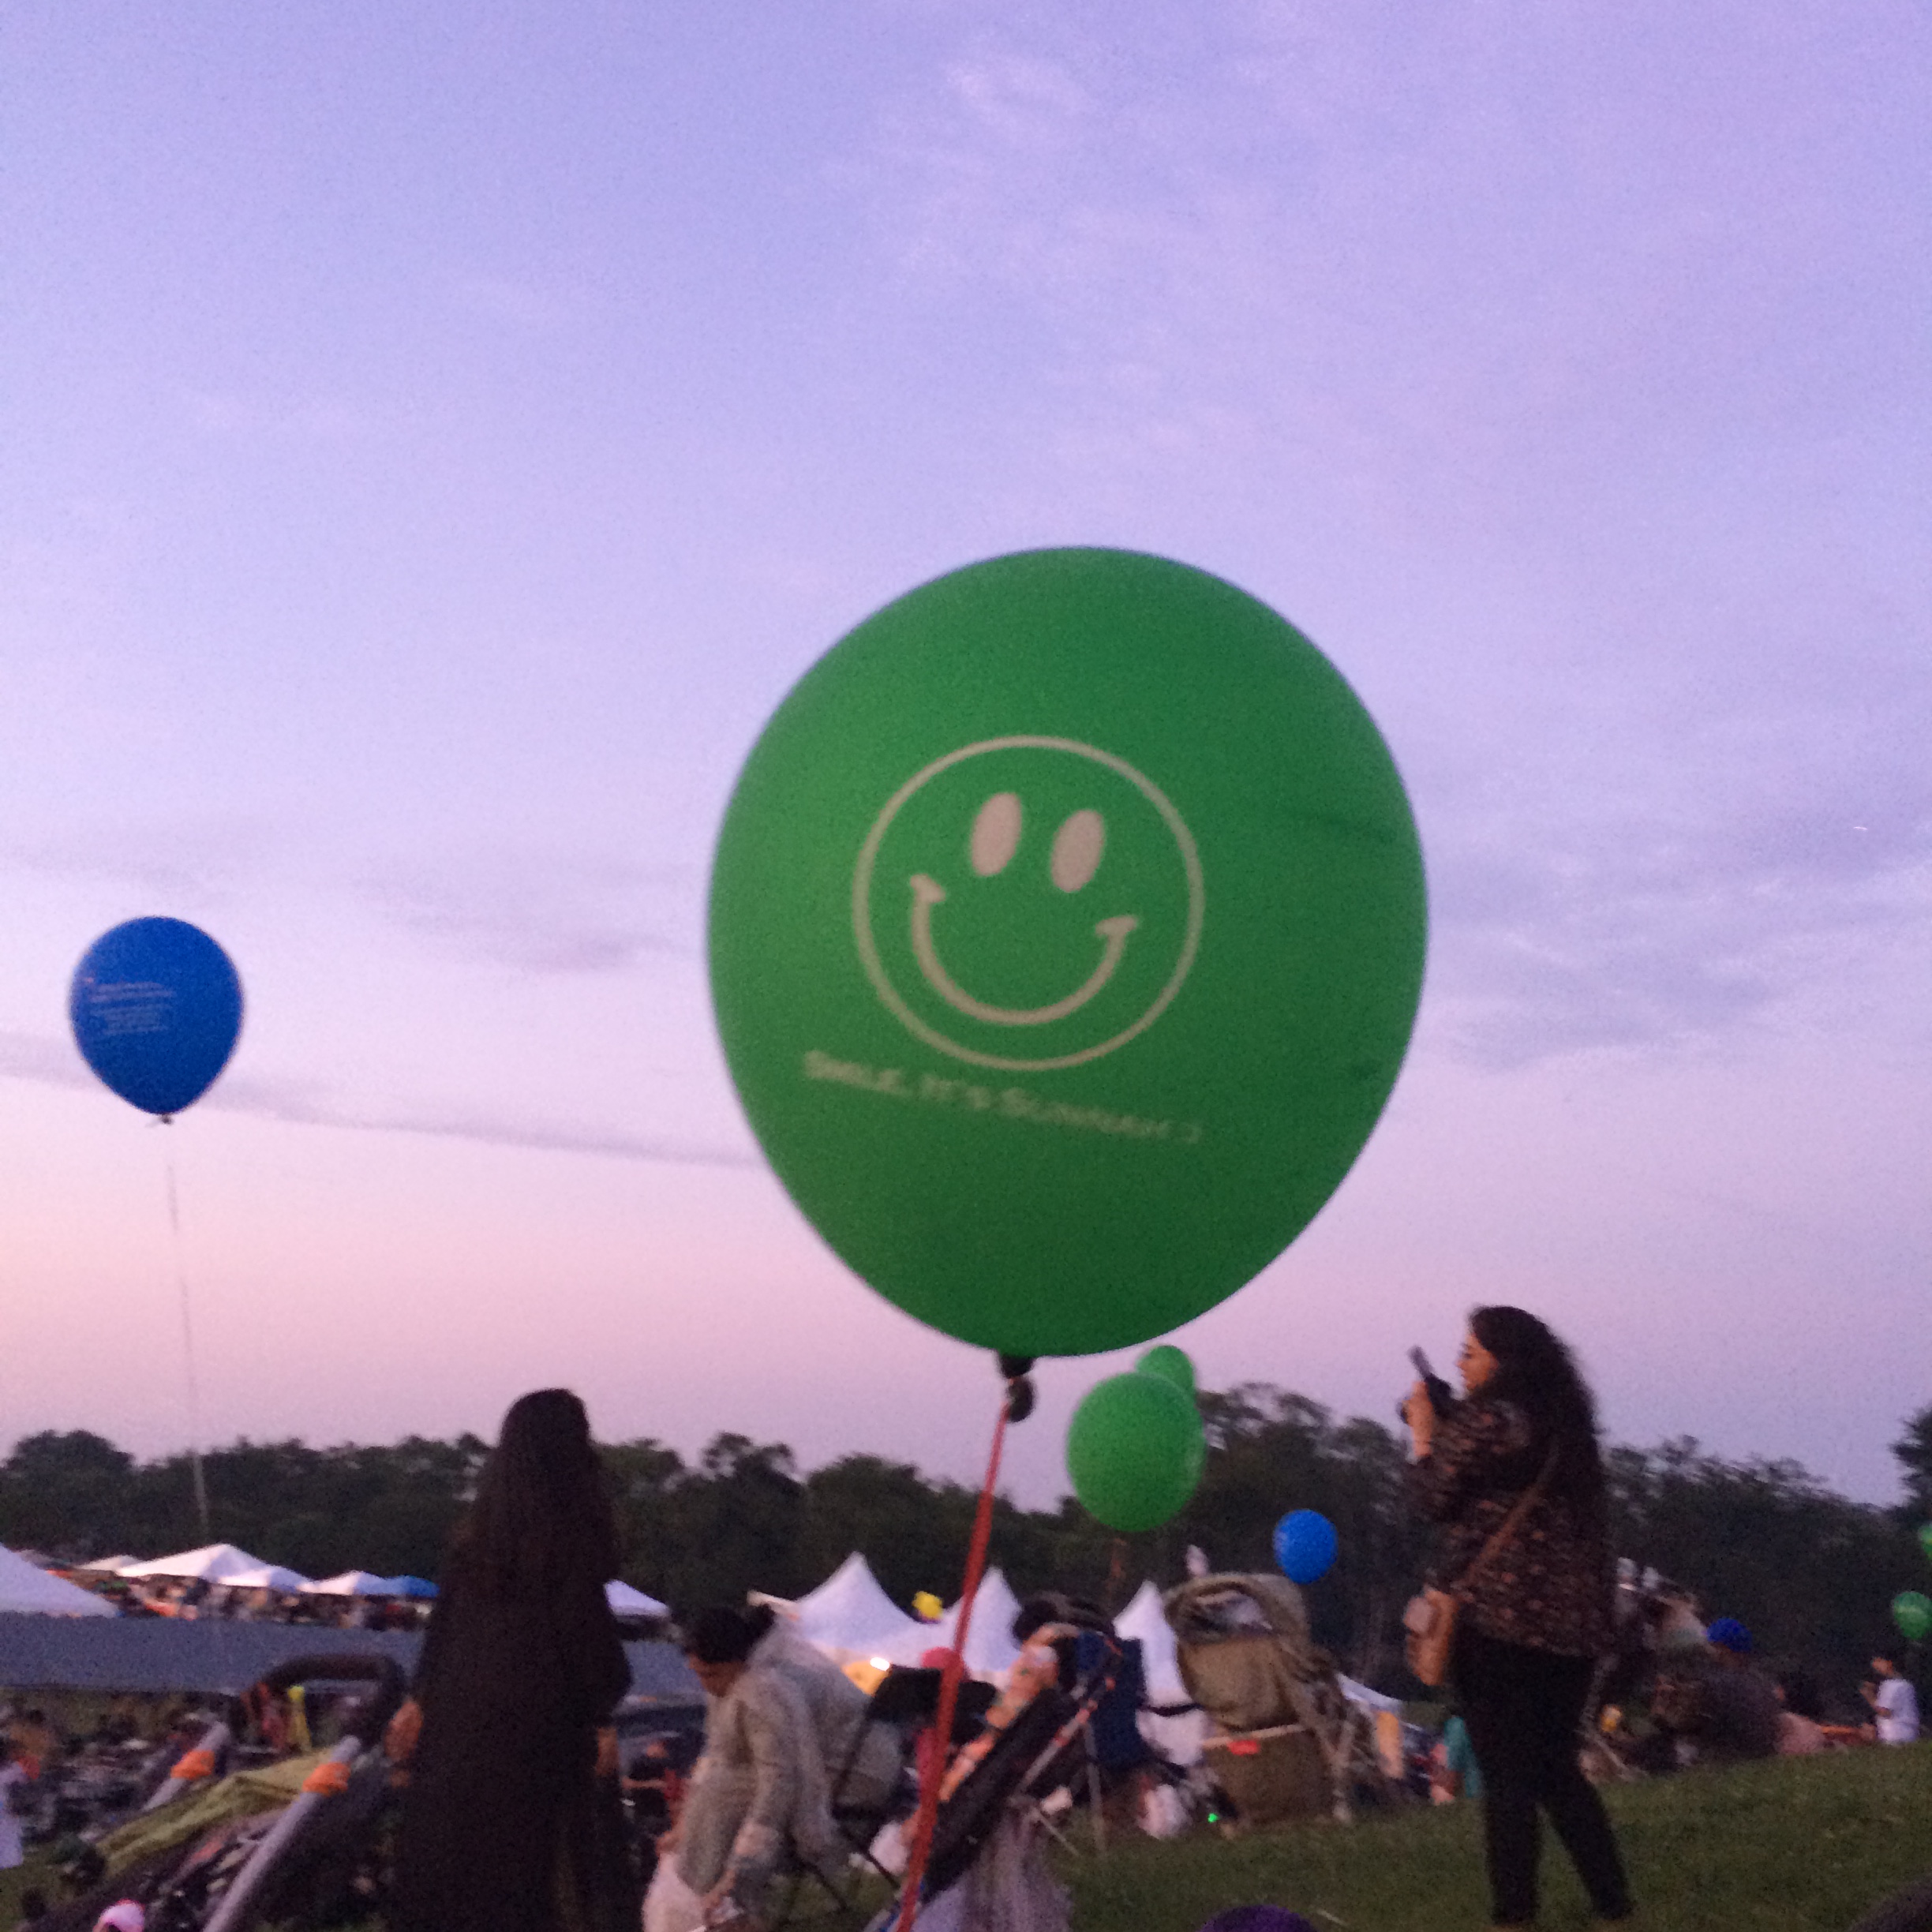 The balloon says "smile, its sunnah." Sunnah refers to the sayings and actions of the Islamic prophet Muhammad (peace be upon him). 